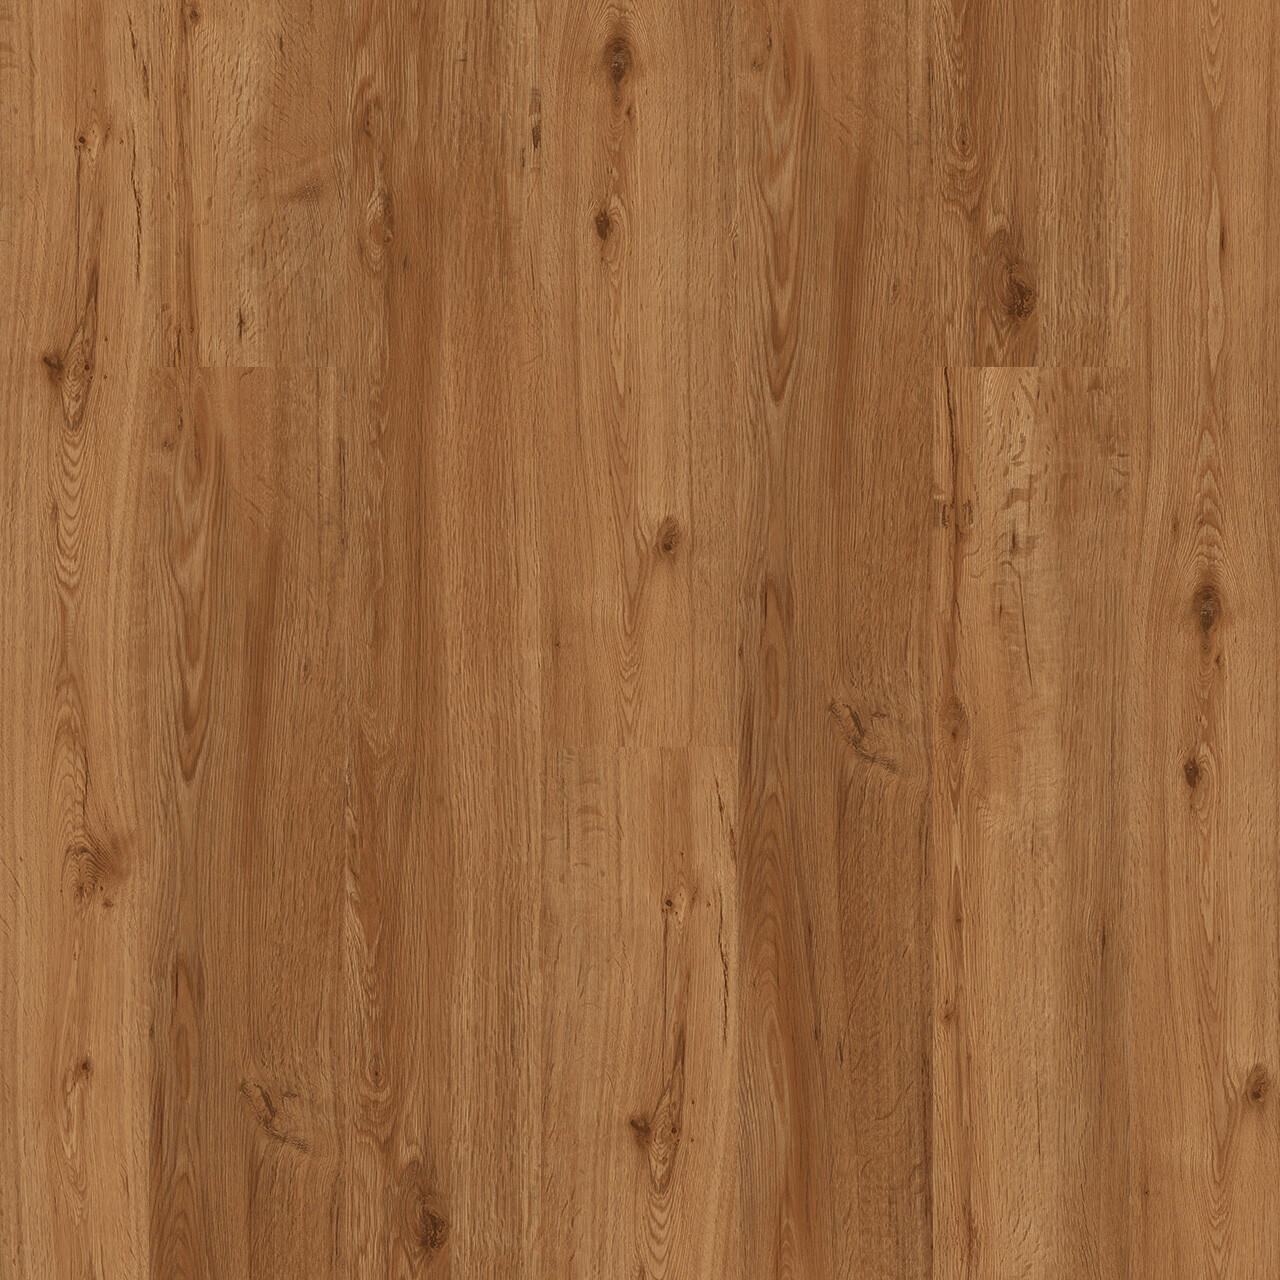 Engineered Floors - Triumph Collection - New Standard Plus - 7 in. x 48 in. - Whitehaven